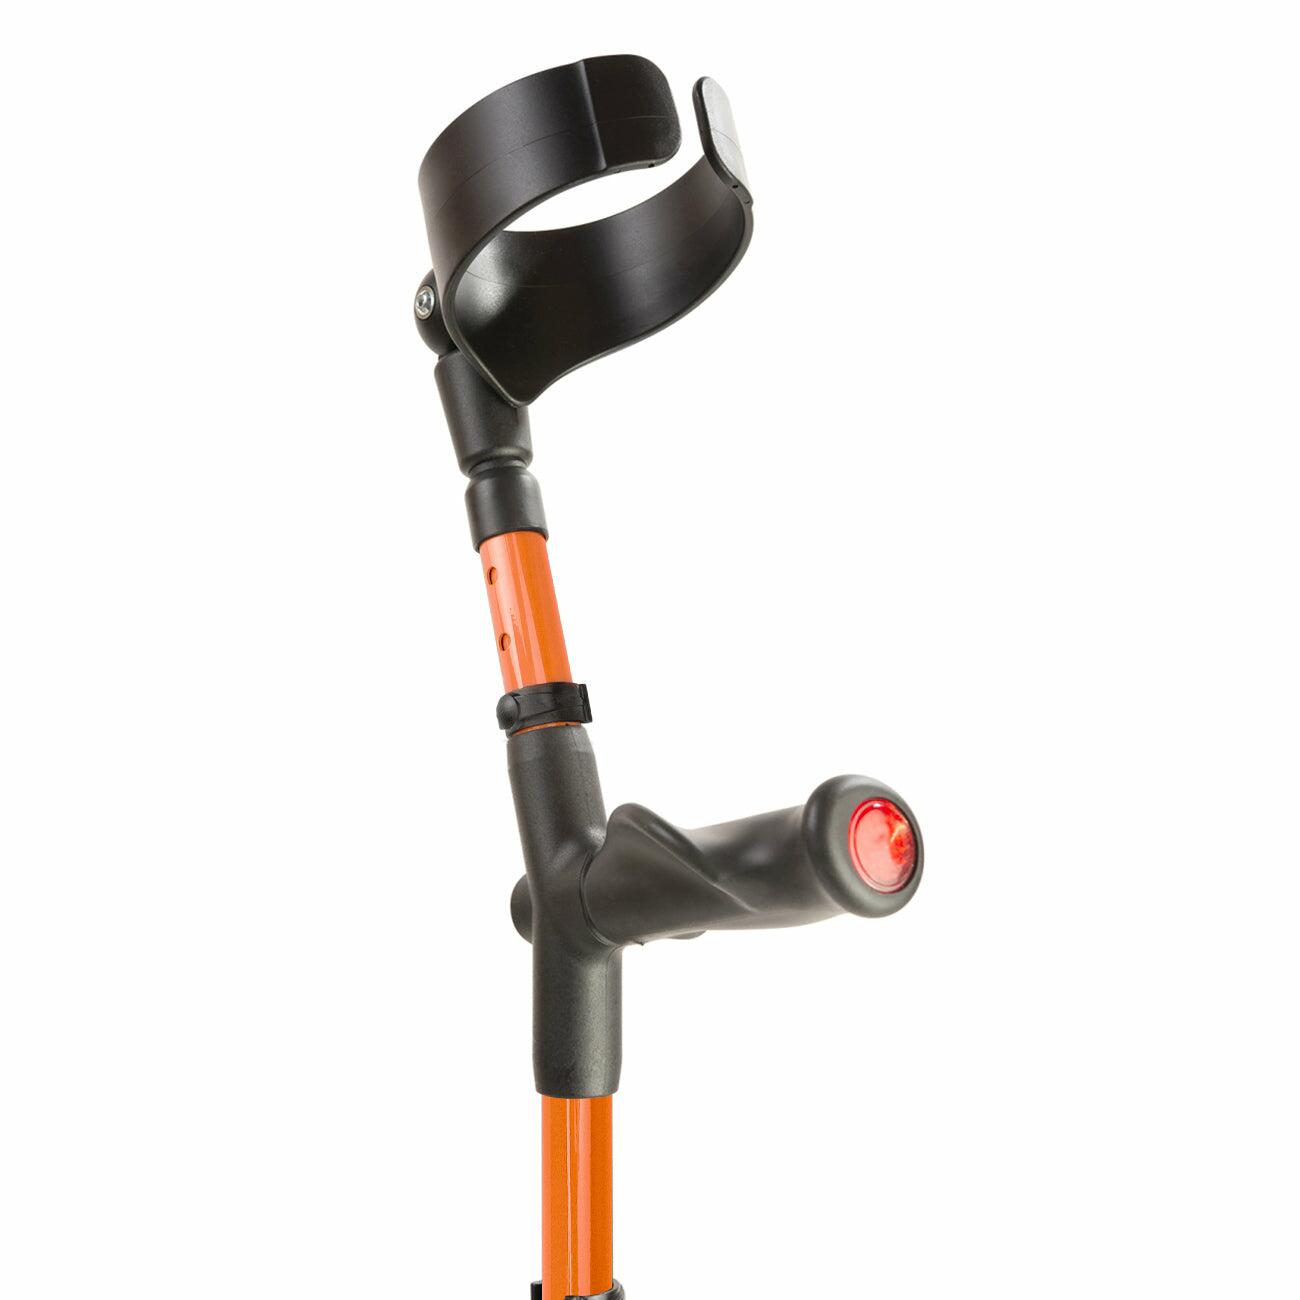 Comfort grip handle and closed cuff of an orange Flexyfoot Comfort Grip Double Adjustable Crutch